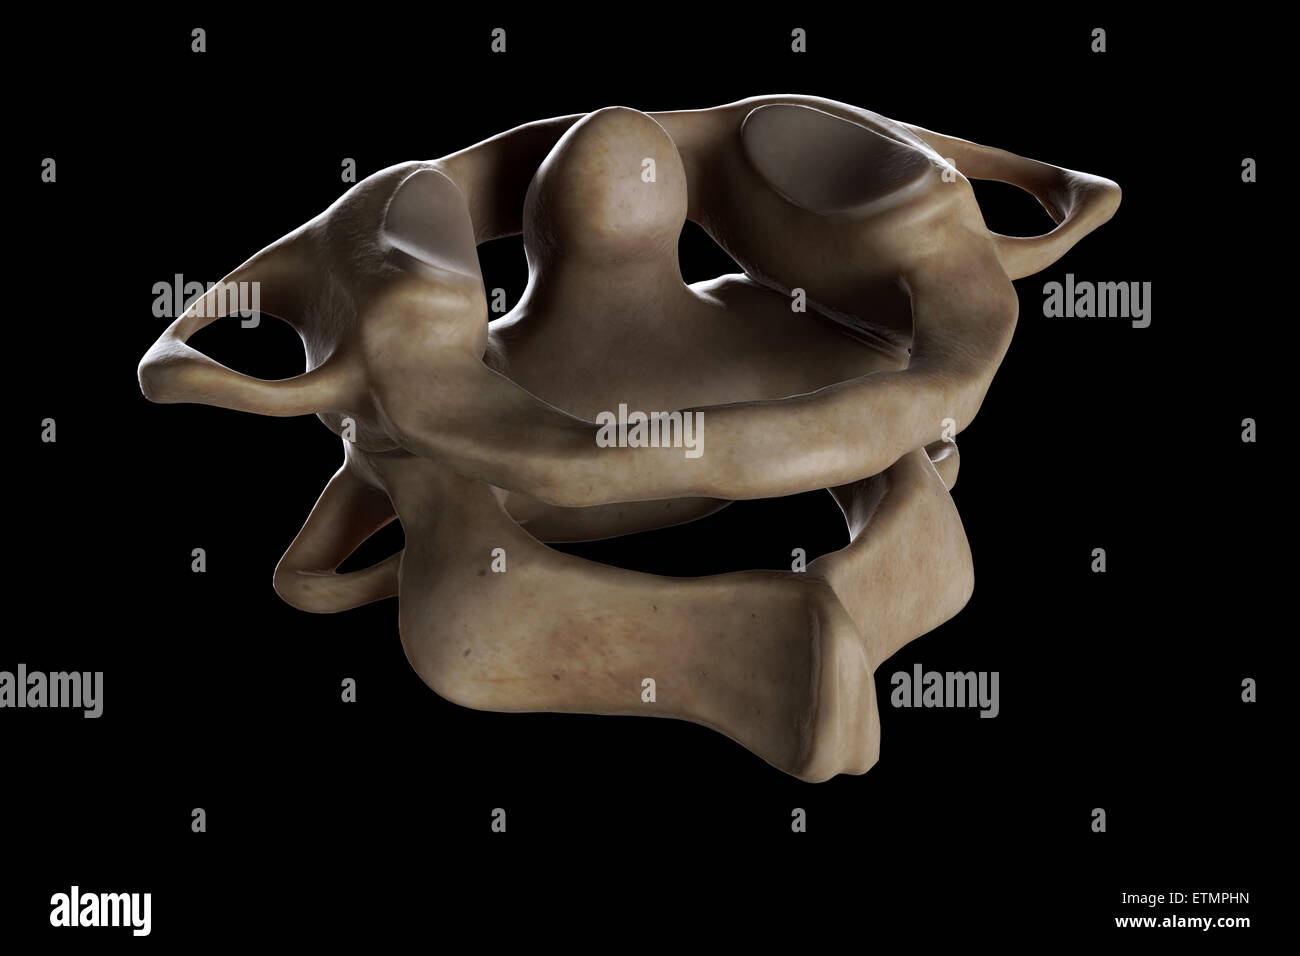 Illustration showing the atlas and axis vertebrae of the neck. Stock Photo